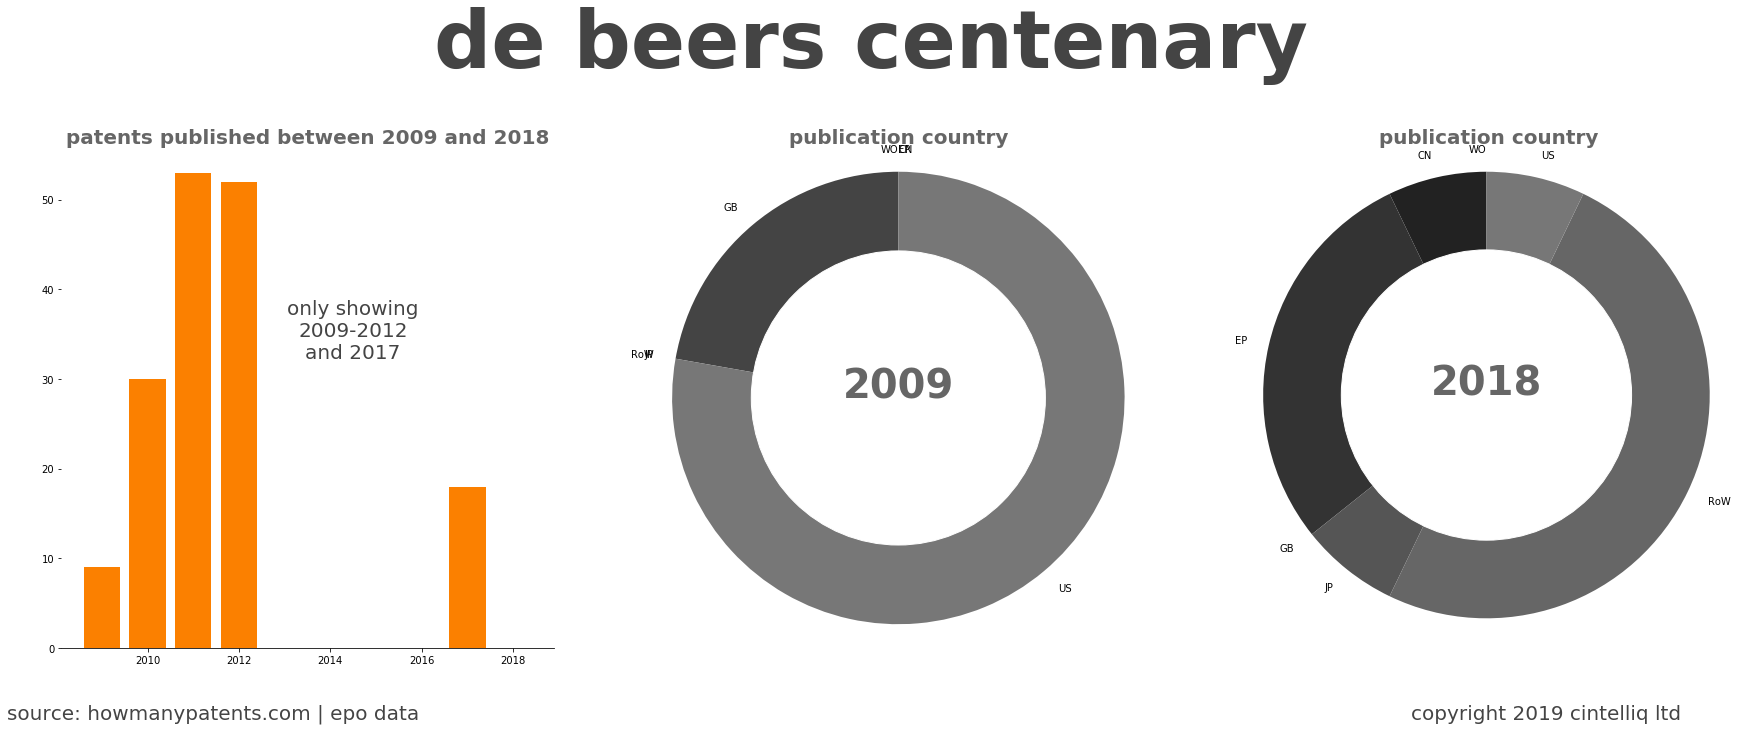 summary of patents for De Beers Centenary